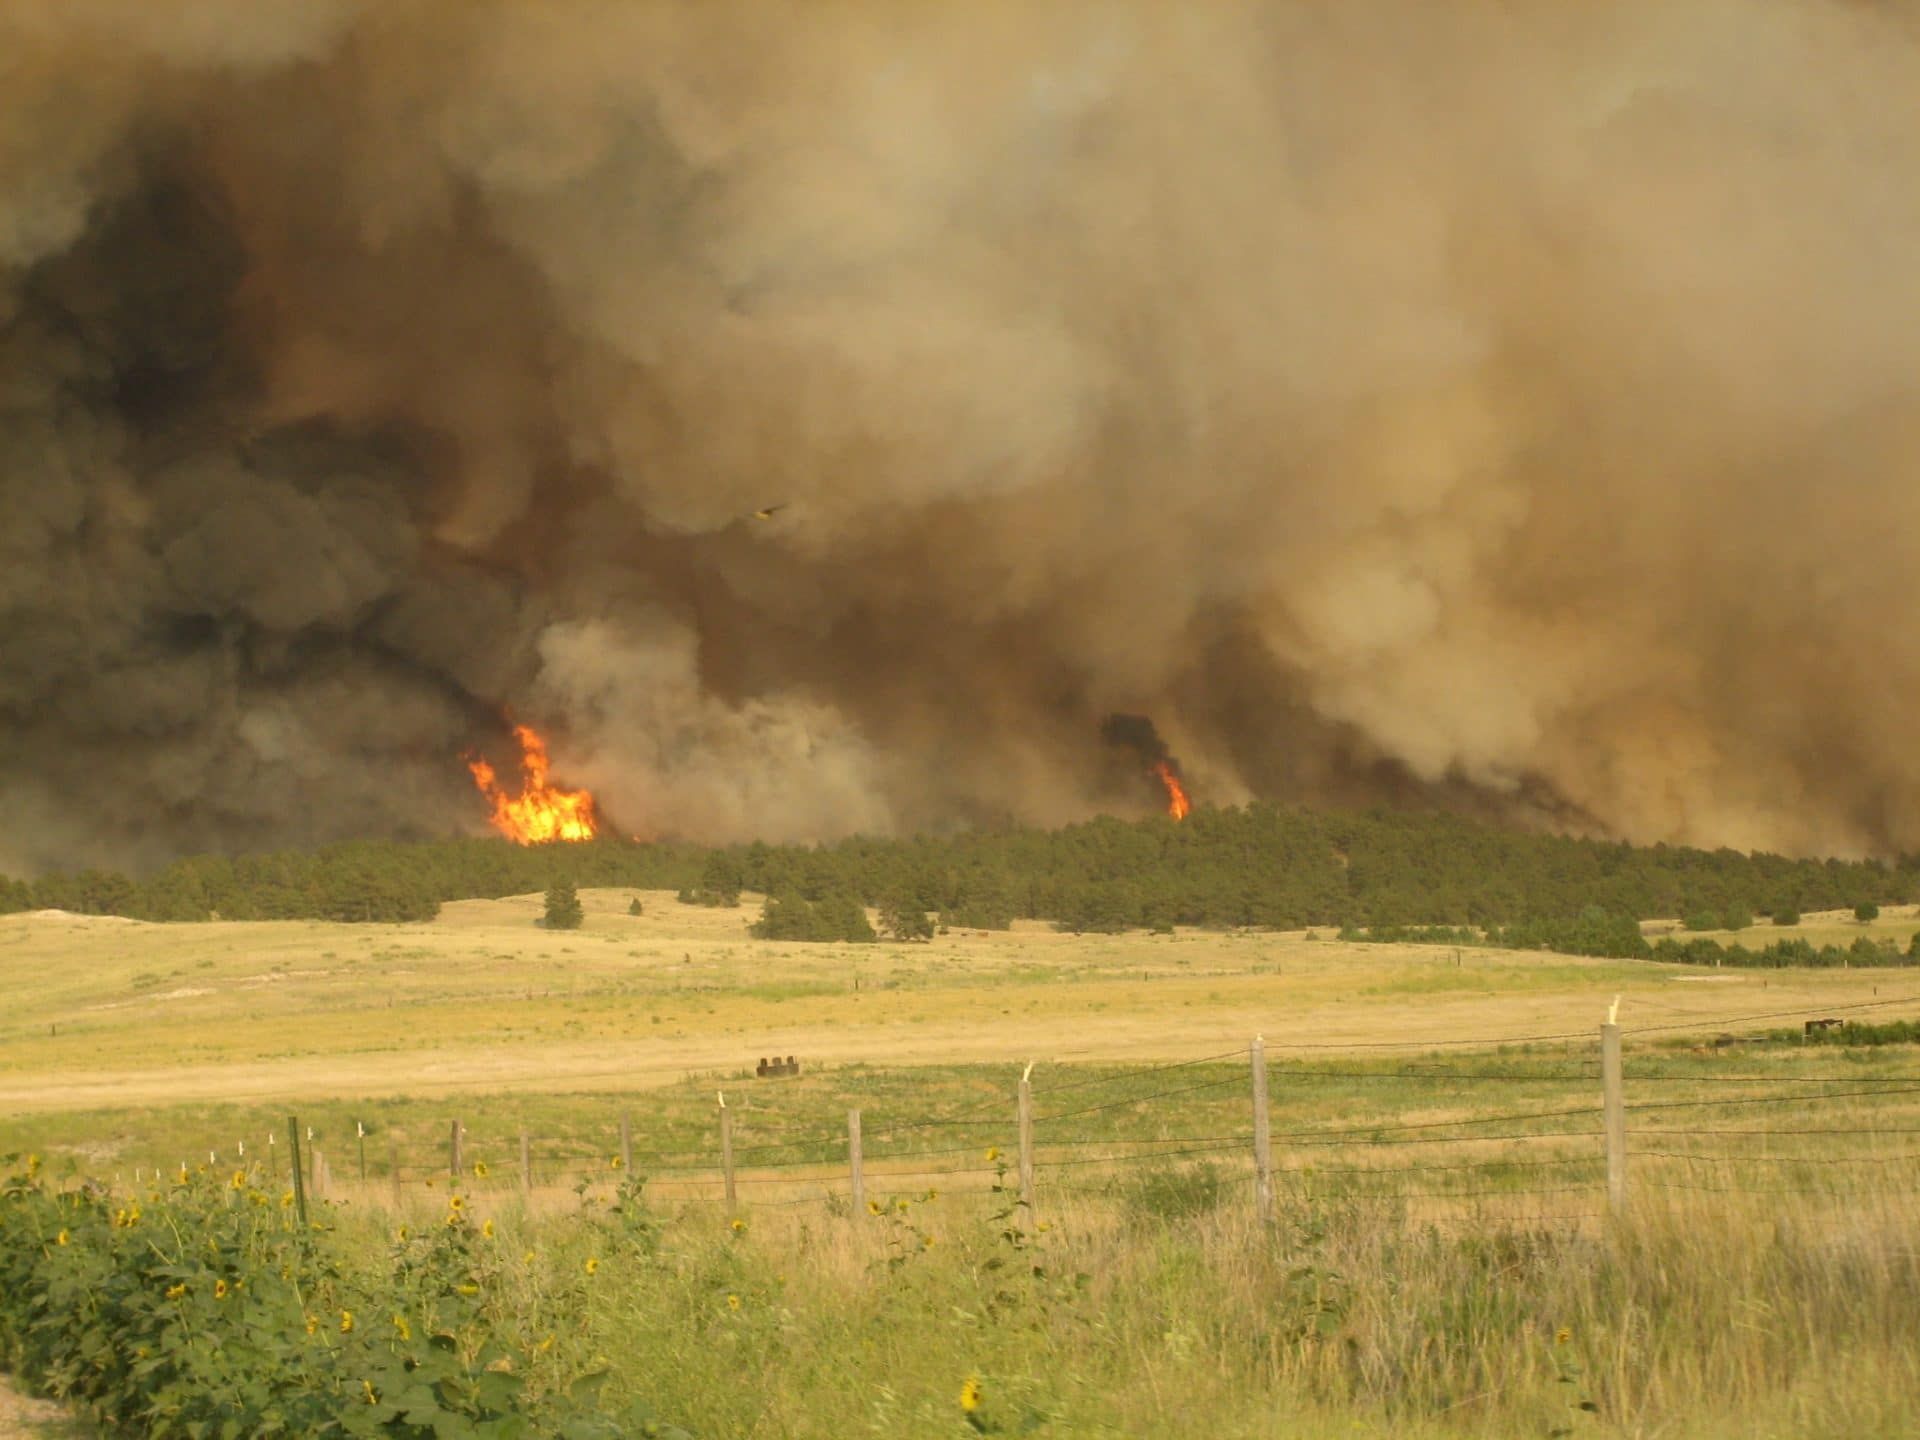 Spotted Tail Fire, only several hours old, rages northward toward the town of Chadron, Nebraska